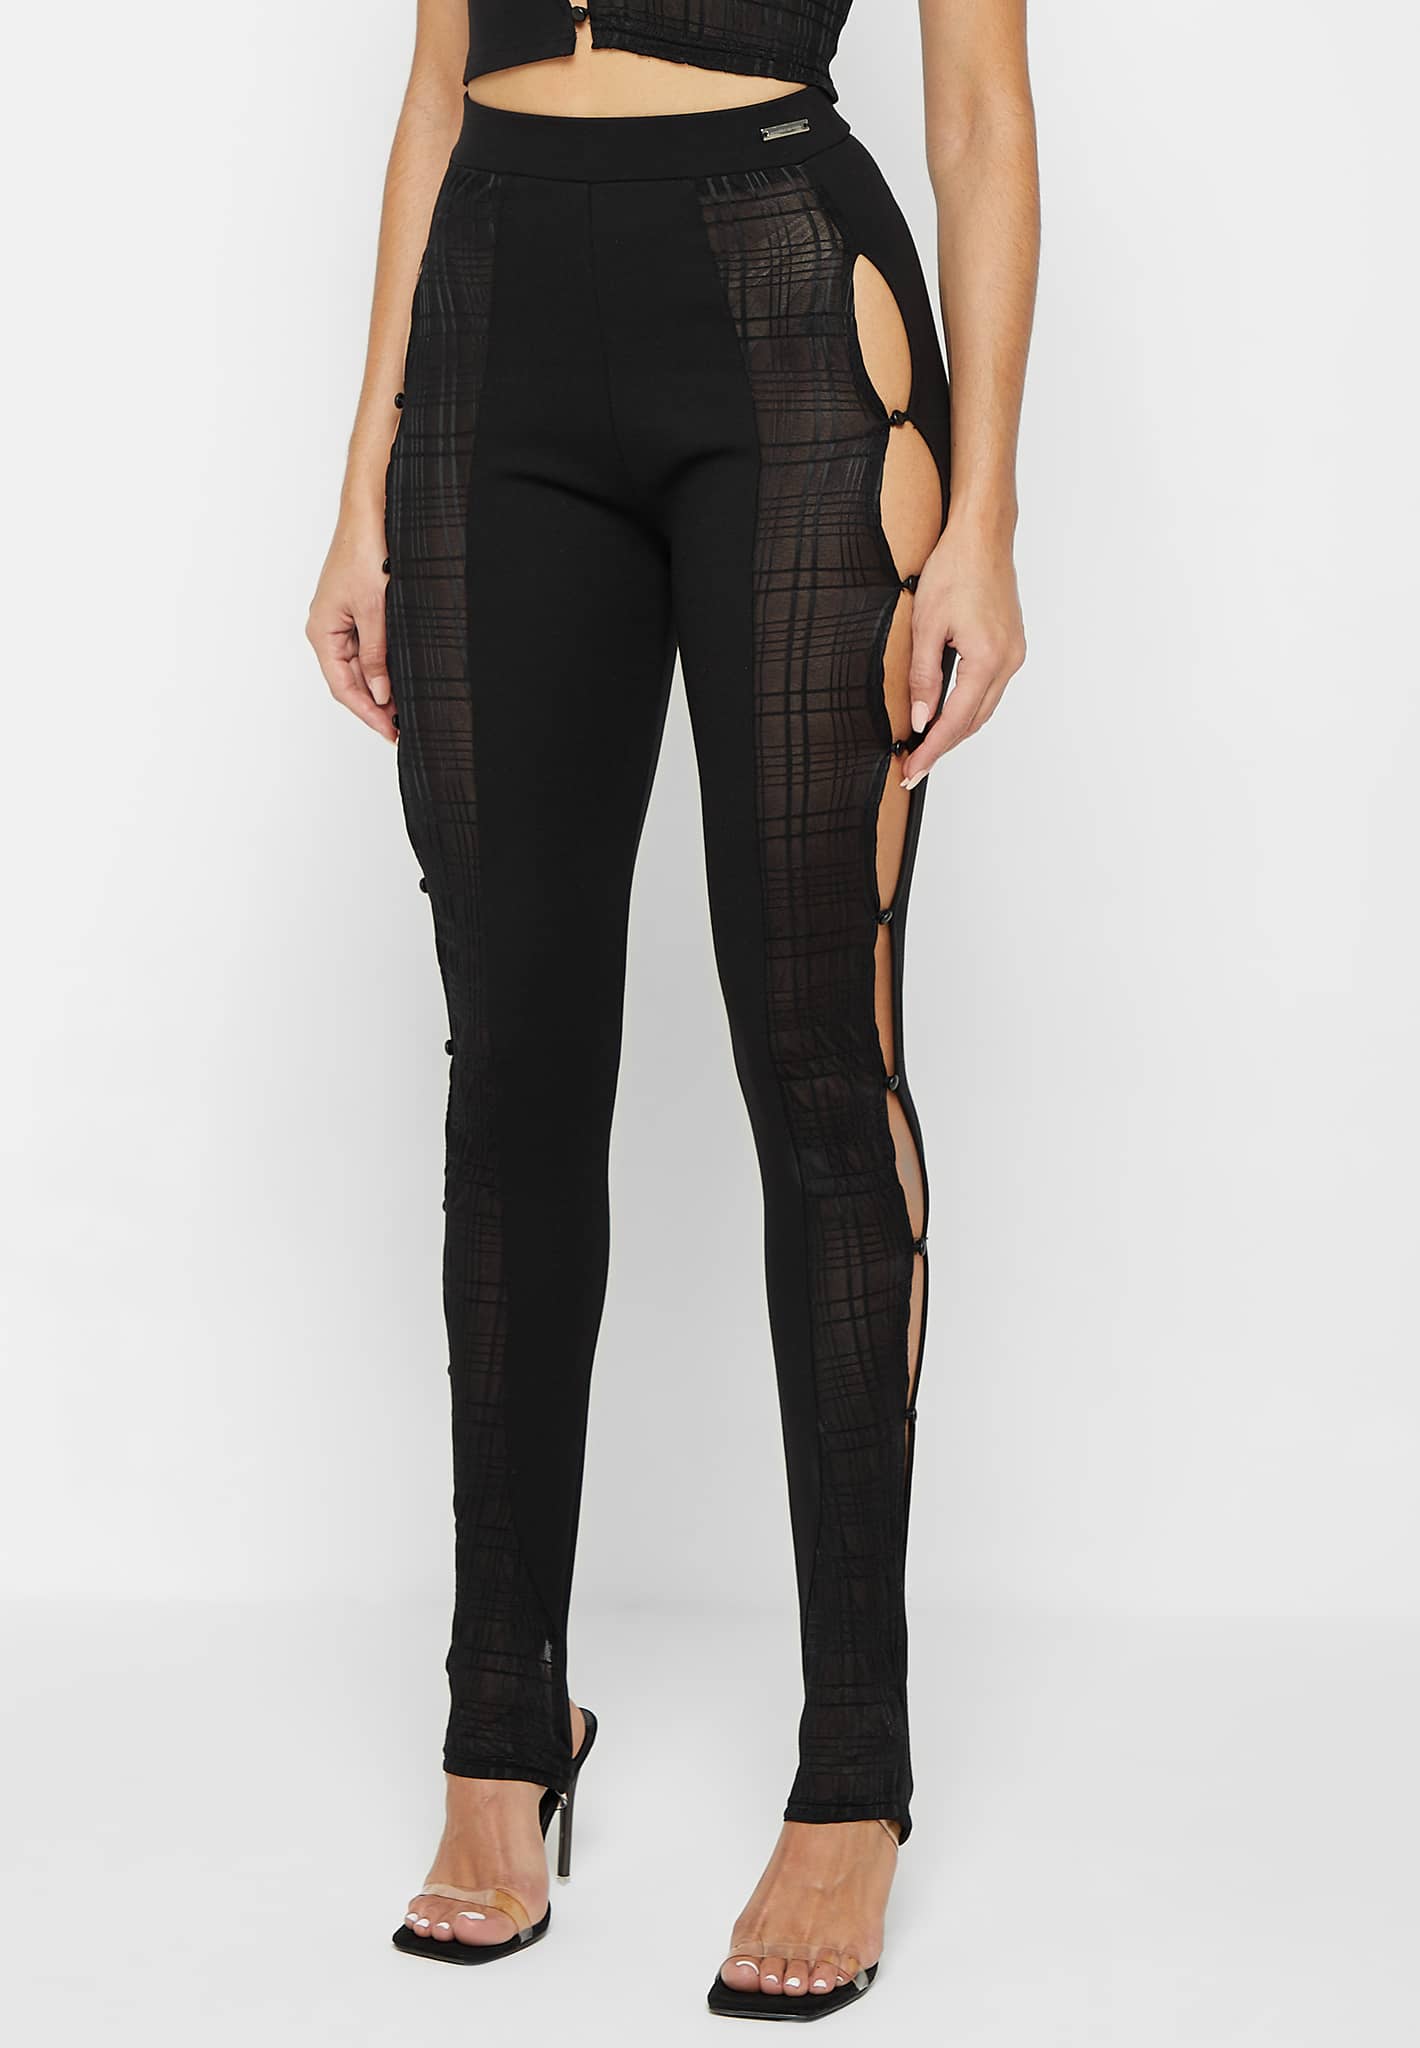 Leggings Mesh Cutouts | International Society of Precision Agriculture